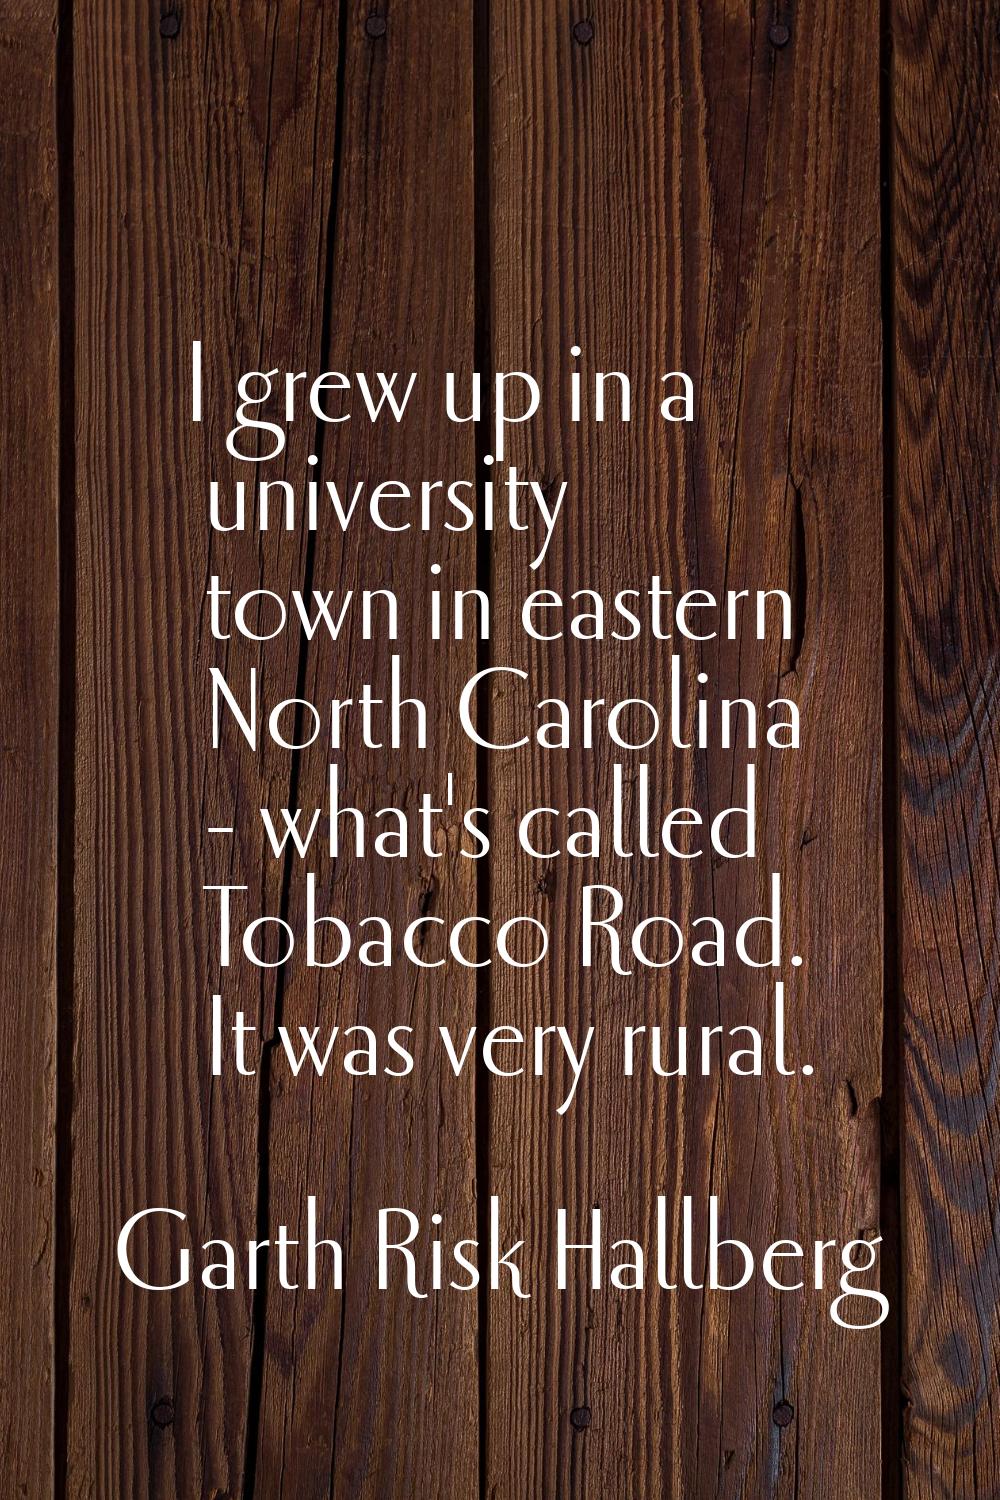 I grew up in a university town in eastern North Carolina - what's called Tobacco Road. It was very 